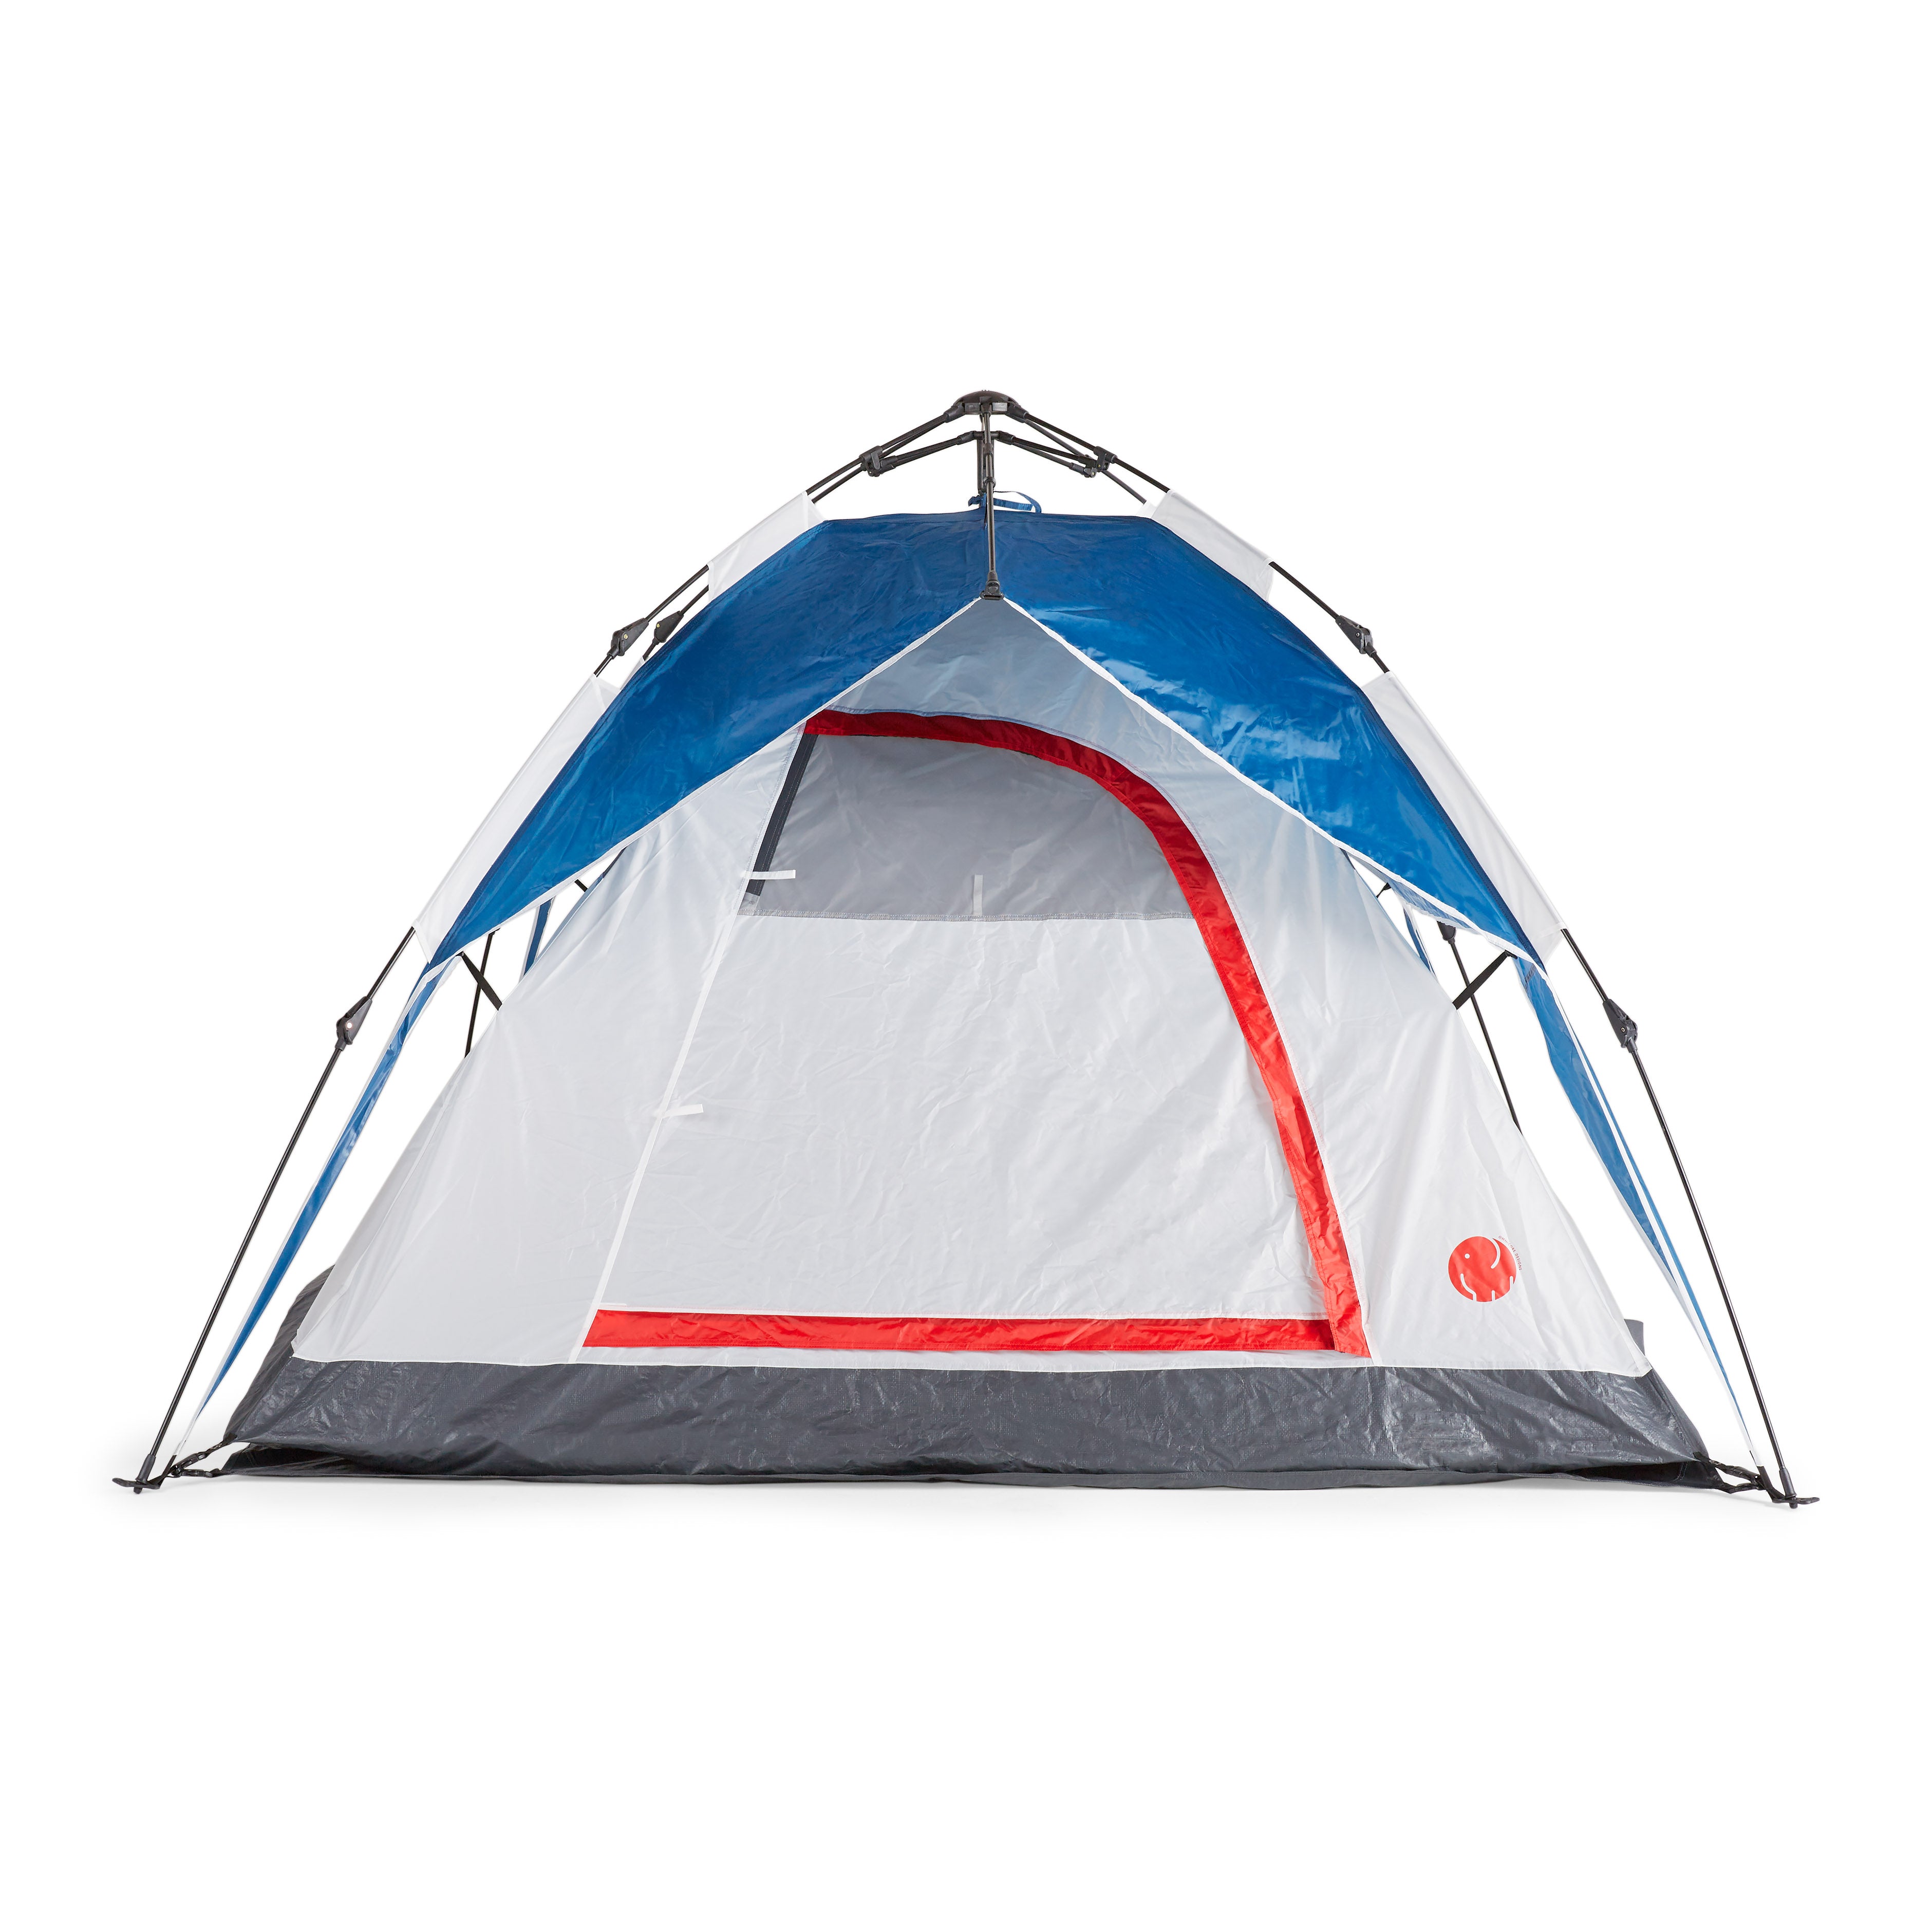 Rise lovgivning nedenunder OMNICORE DESIGNS 3 Person Instant Dome Tent with Detachable Canopy - 7 –  OmniCoreDesigns